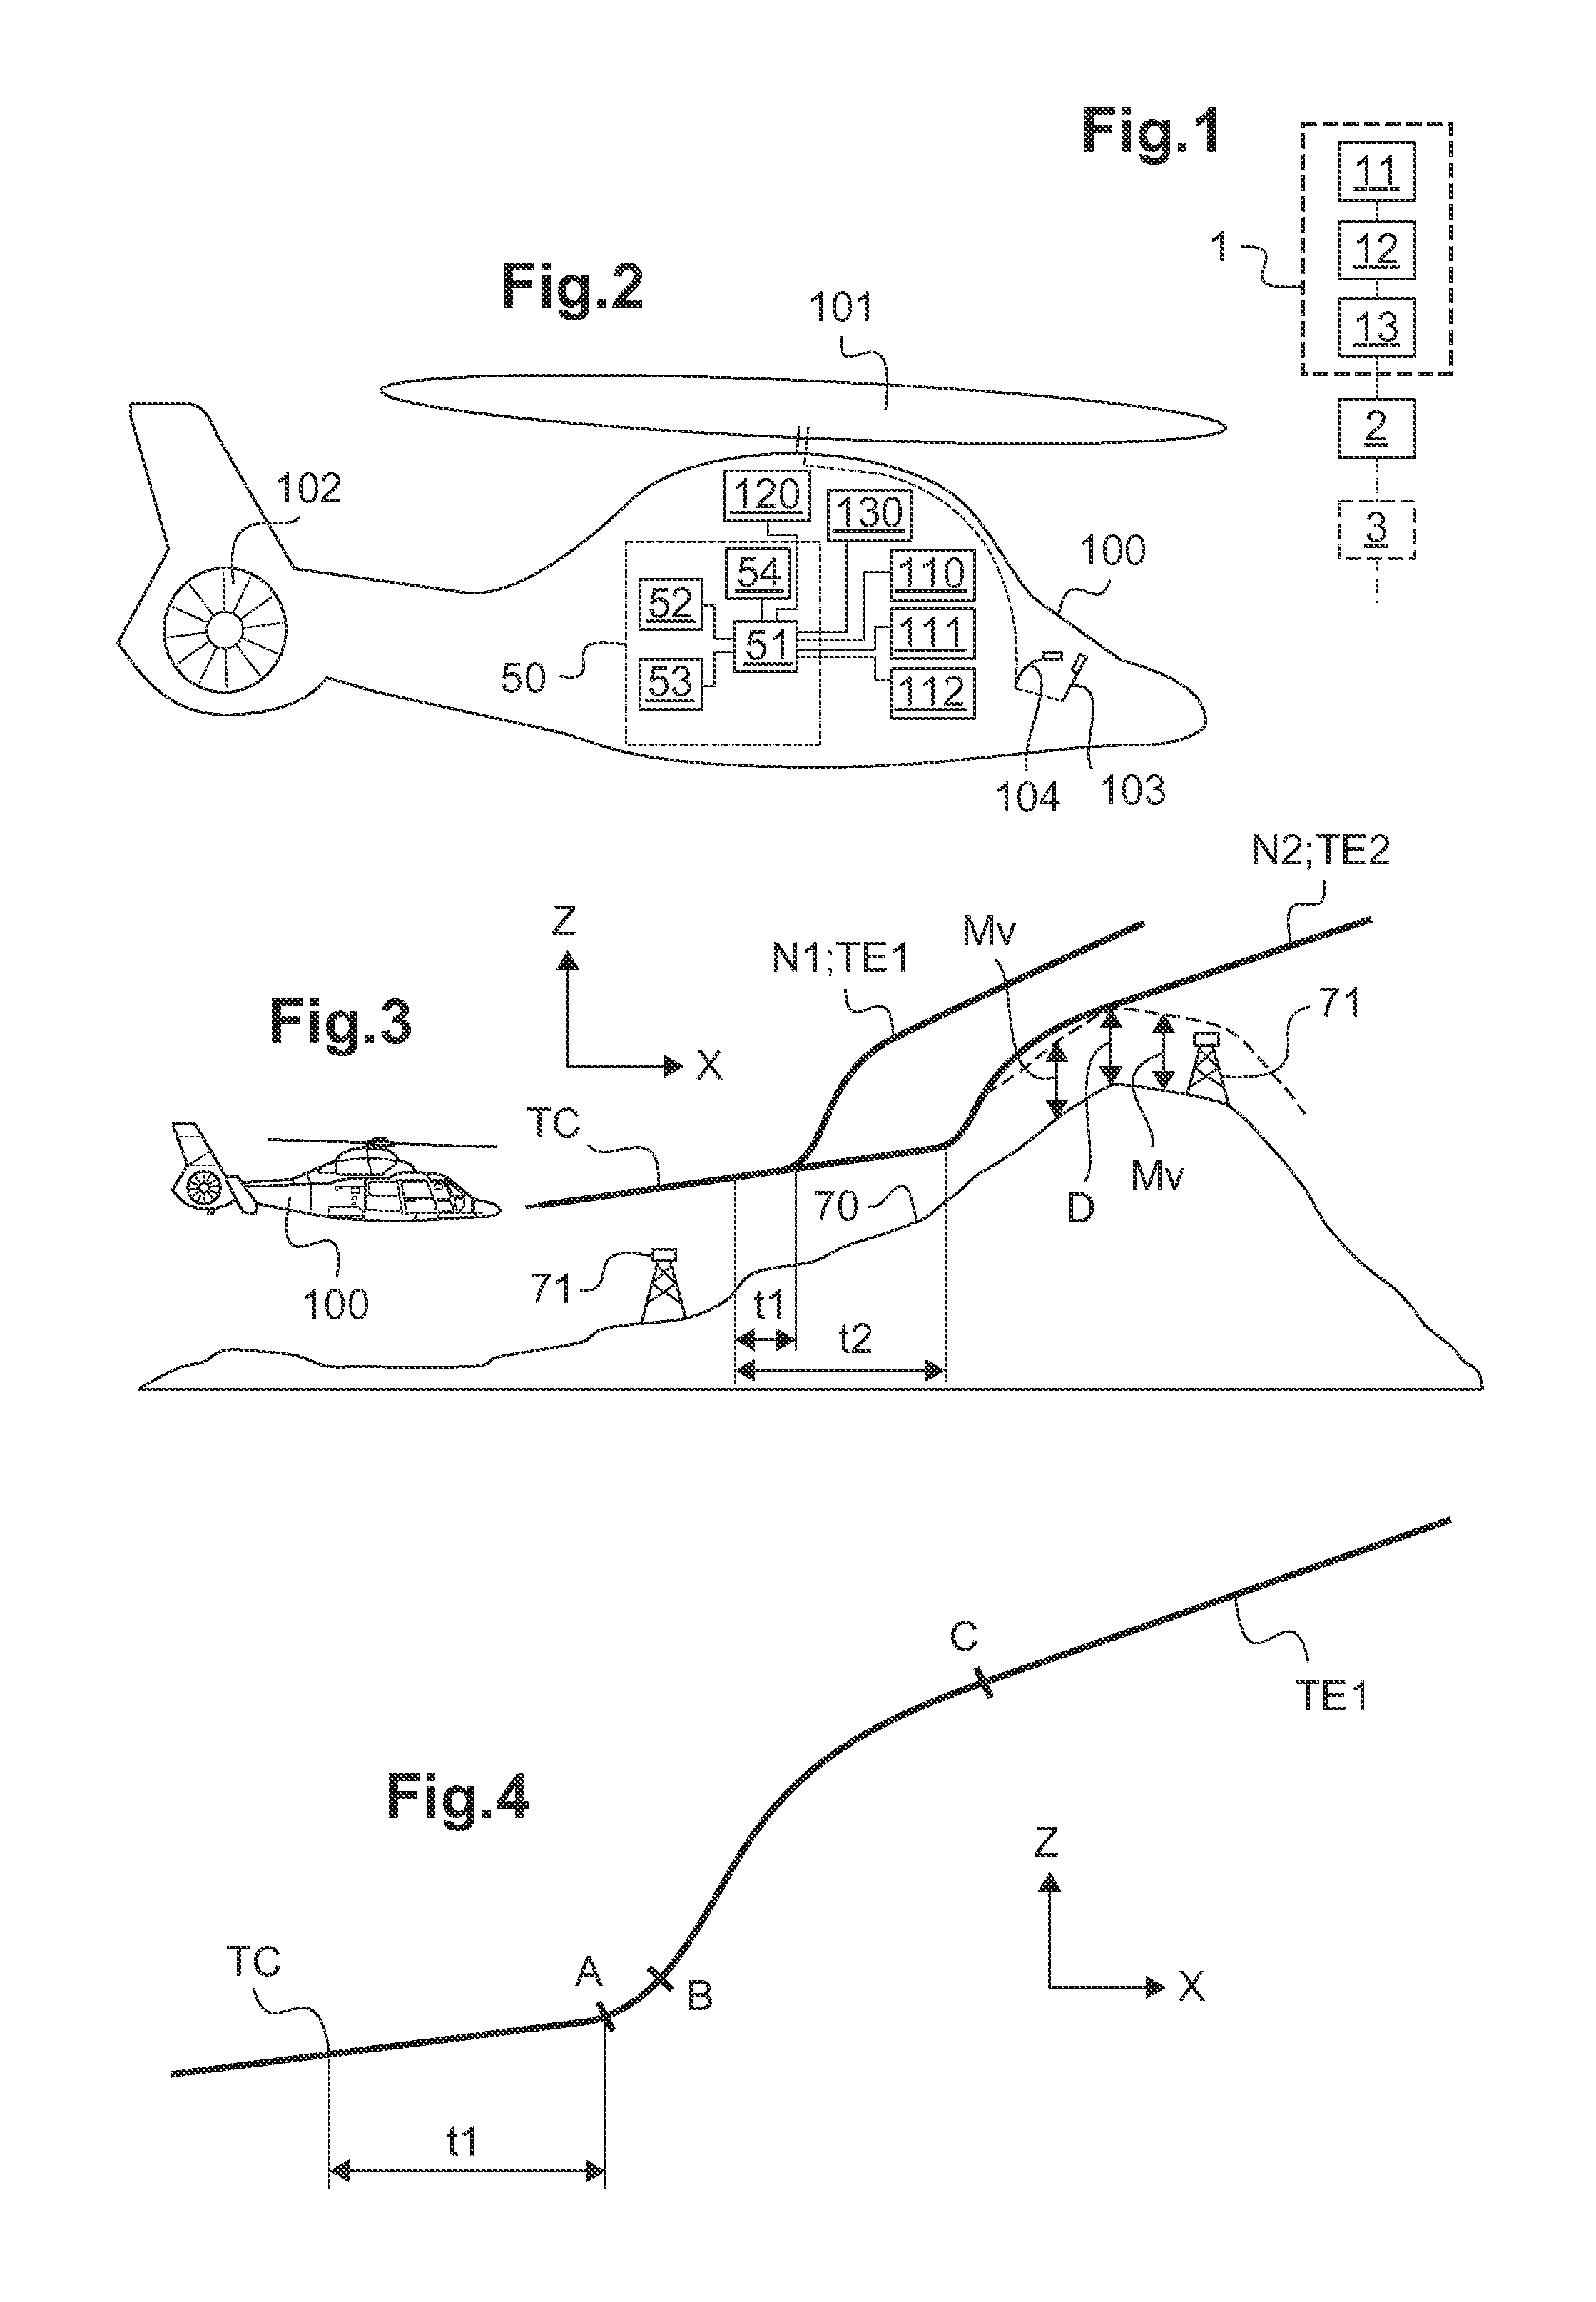 Method and a device for issuing terrain avoidance warnings for a rotary wing aircraft